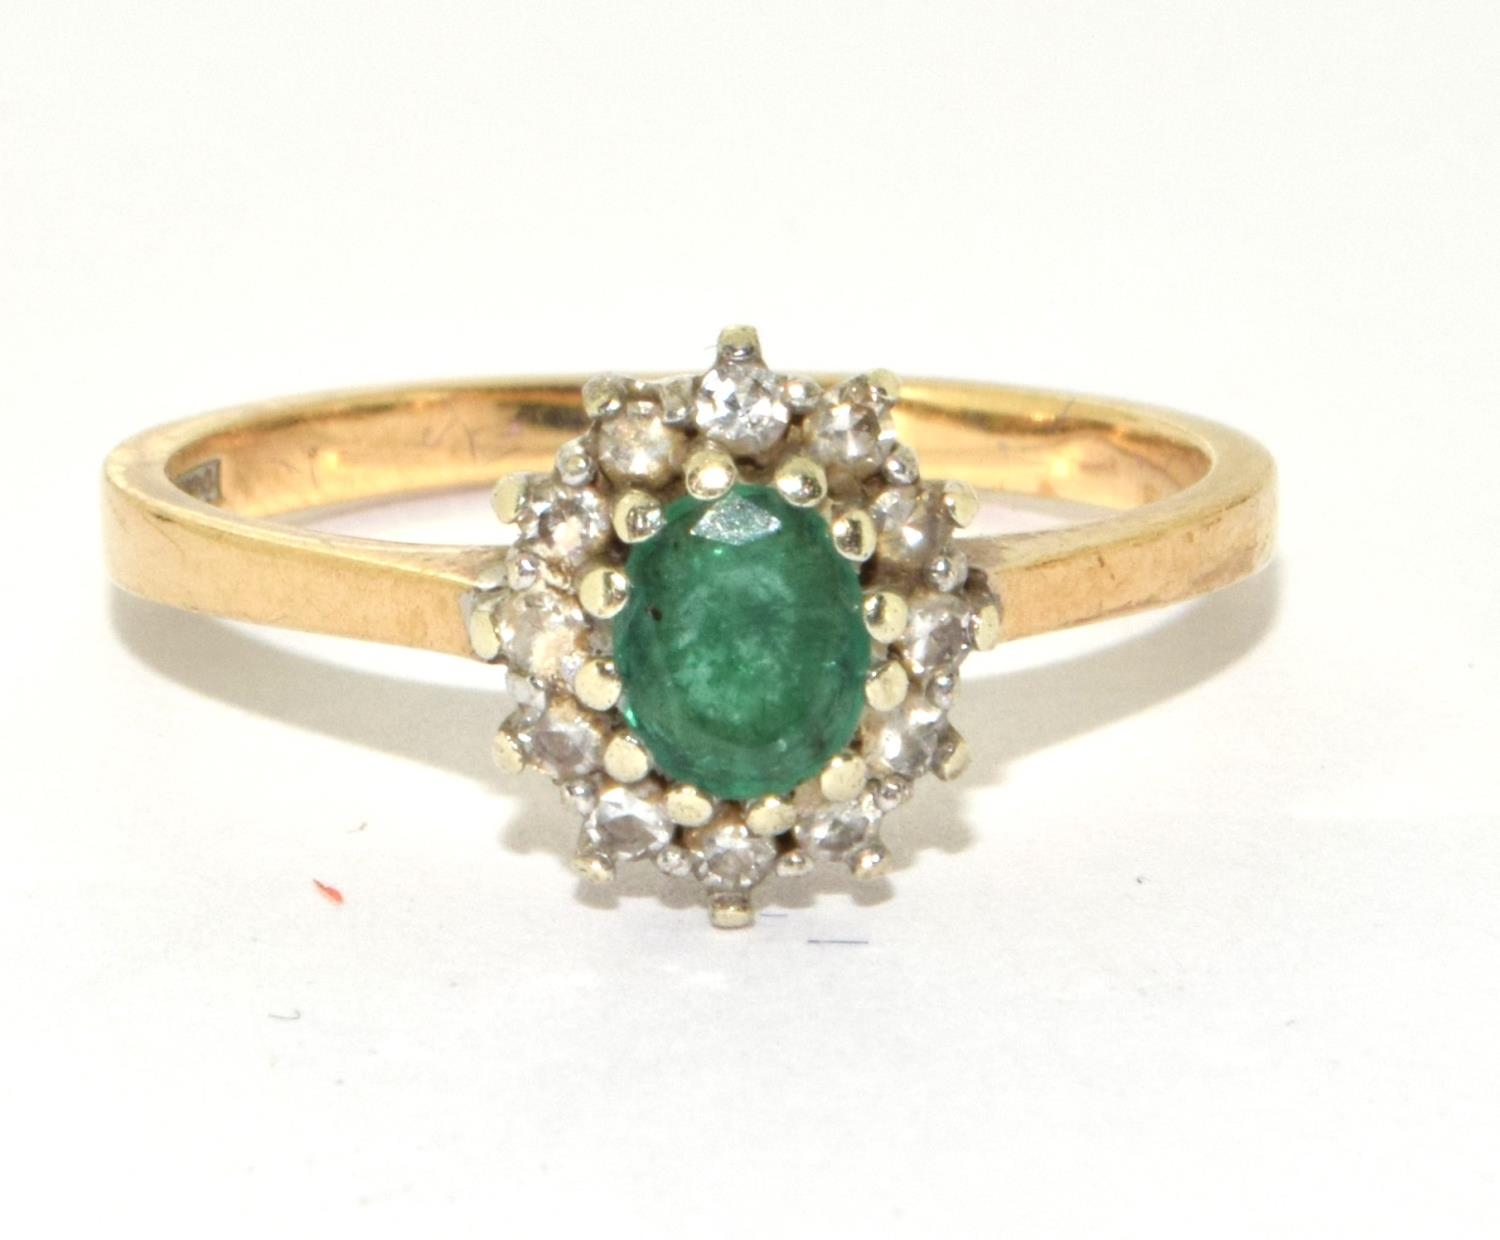 9ct gold Ladies Diamond and emerald ring size O